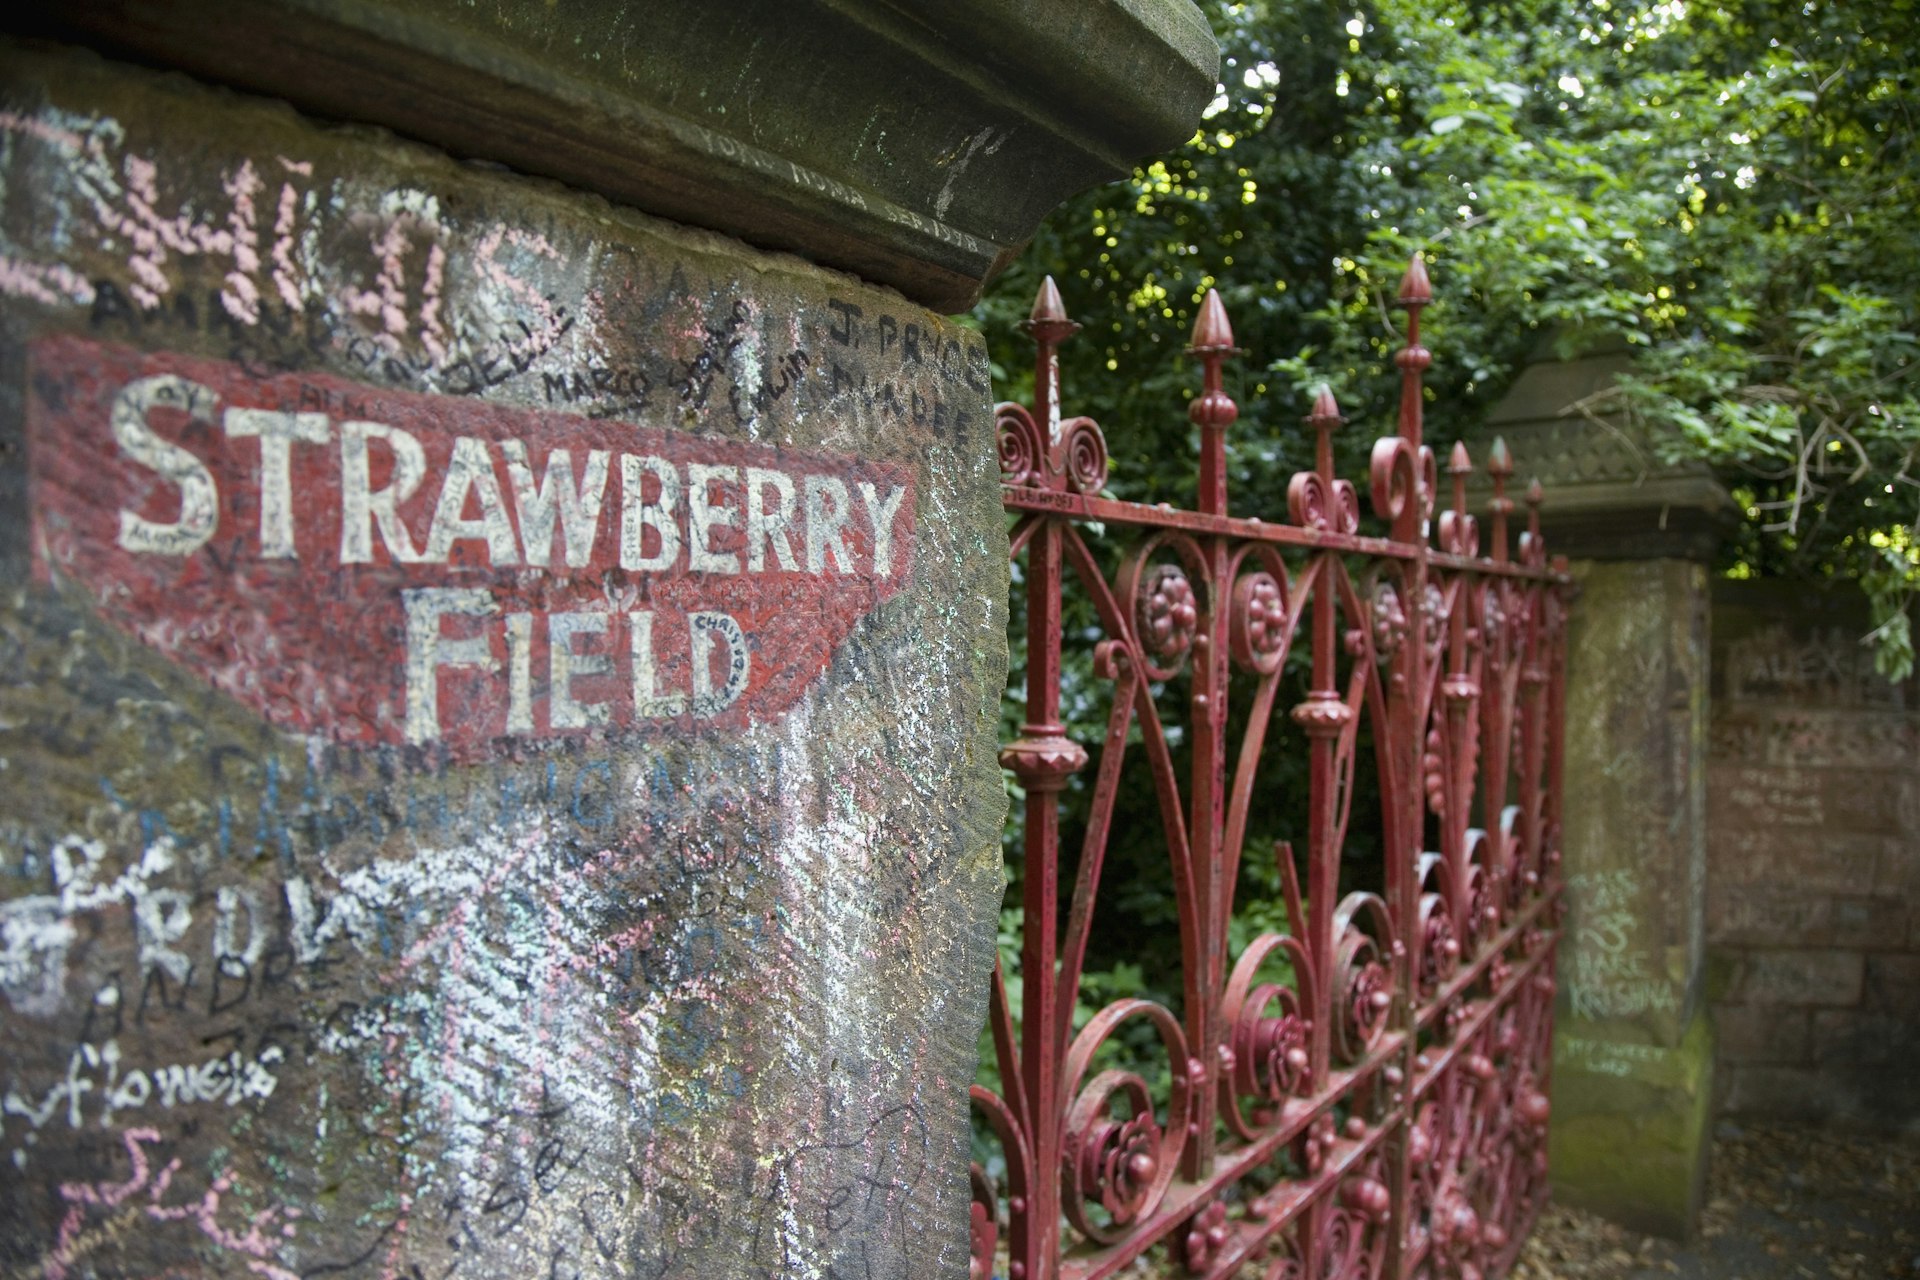 A red wrought-iron gate with graffiti on the adjacent wall - Strawberry Field gate